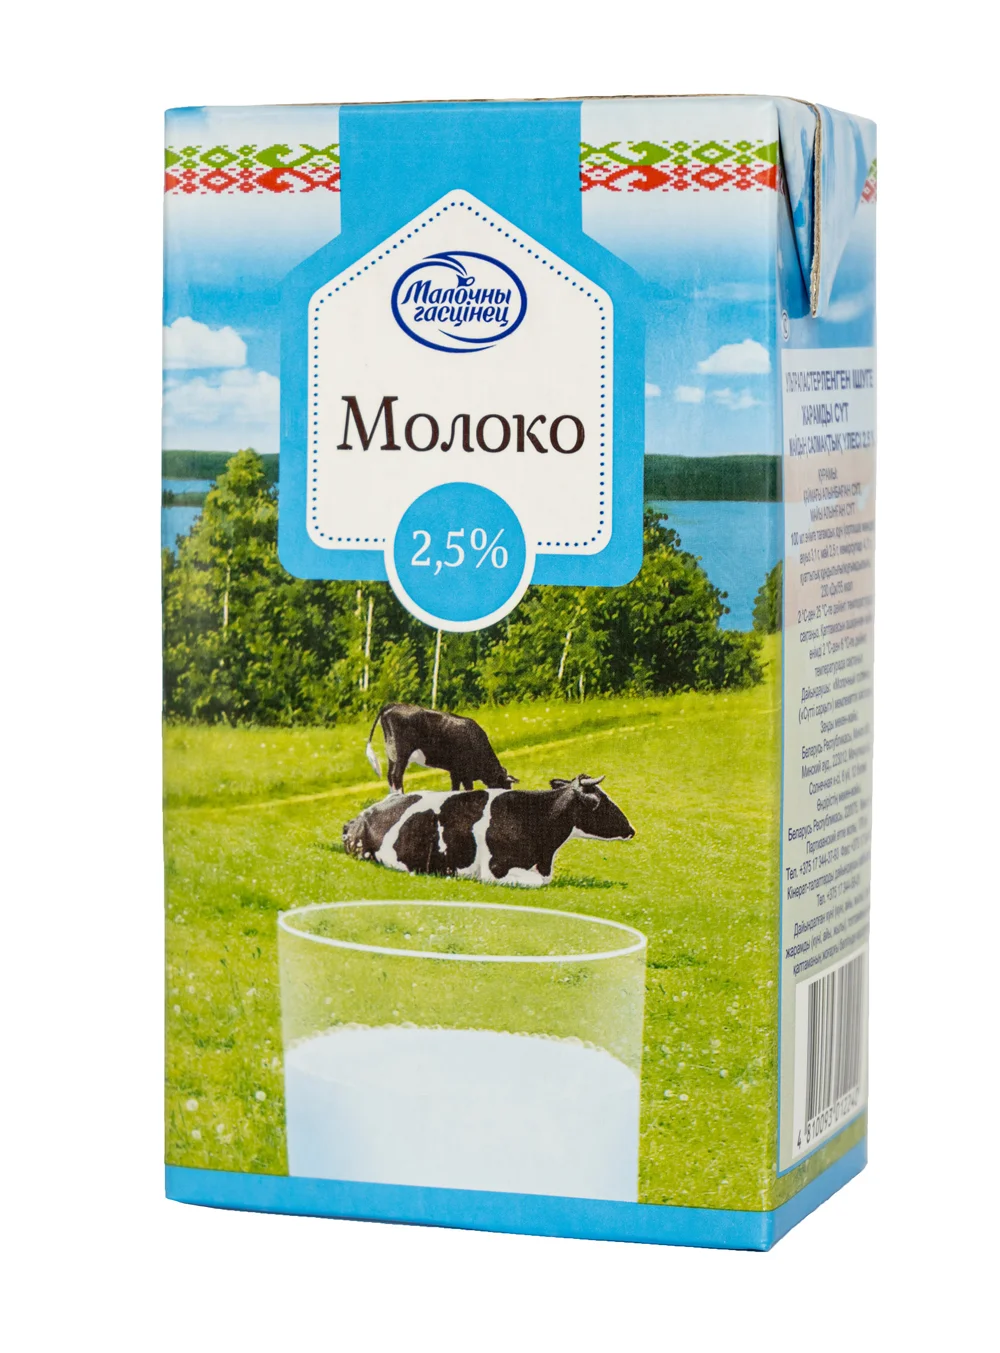 Milk with a fat content of 2.5%